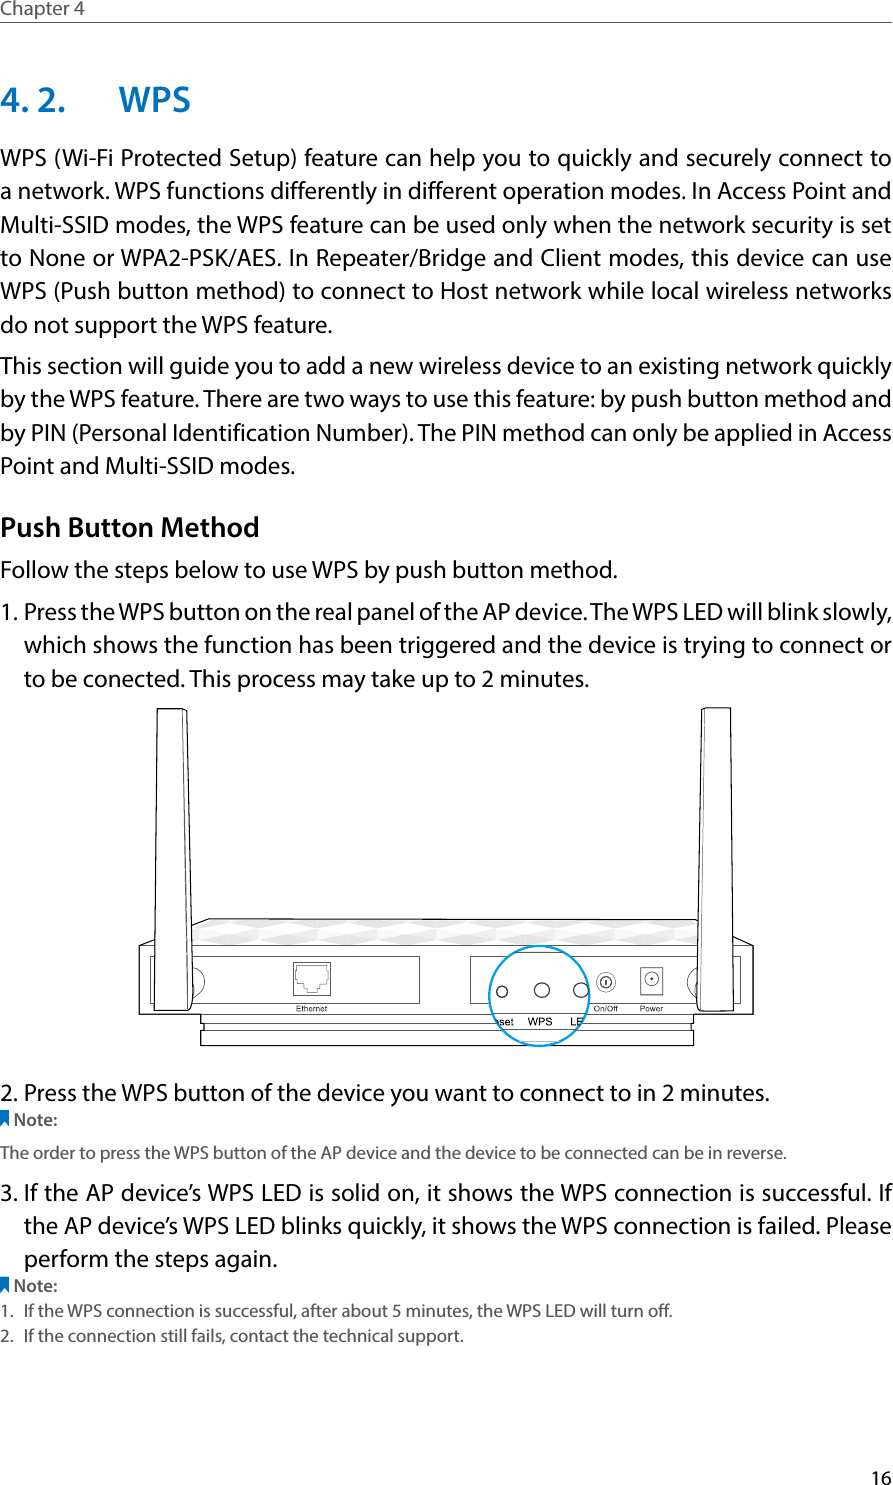 16Chapter 4  4. 2.  WPSWPS (Wi-Fi Protected Setup) feature can help you to quickly and securely connect to a network. WPS functions differently in different operation modes. In Access Point and Multi-SSID modes, the WPS feature can be used only when the network security is set to None or WPA2-PSK/AES. In Repeater/Bridge and Client modes, this device can use WPS (Push button method) to connect to Host network while local wireless networks do not support the WPS feature.This section will guide you to add a new wireless device to an existing network quickly by the WPS feature. There are two ways to use this feature: by push button method and by PIN (Personal Identification Number). The PIN method can only be applied in Access Point and Multi-SSID modes.Push Button MethodFollow the steps below to use WPS by push button method.1. Press the WPS button on the real panel of the AP device. The WPS LED will blink slowly, which shows the function has been triggered and the device is trying to connect or to be conected. This process may take up to 2 minutes.2. Press the WPS button of the device you want to connect to in 2 minutes. Note:The order to press the WPS button of the AP device and the device to be connected can be in reverse.3. If the AP device’s WPS LED is solid on, it shows the WPS connection is successful. If the AP device’s WPS LED blinks quickly, it shows the WPS connection is failed. Please perform the steps again.Note:1.  If the WPS connection is successful, after about 5 minutes, the WPS LED will turn off. 2.  If the connection still fails, contact the technical support.